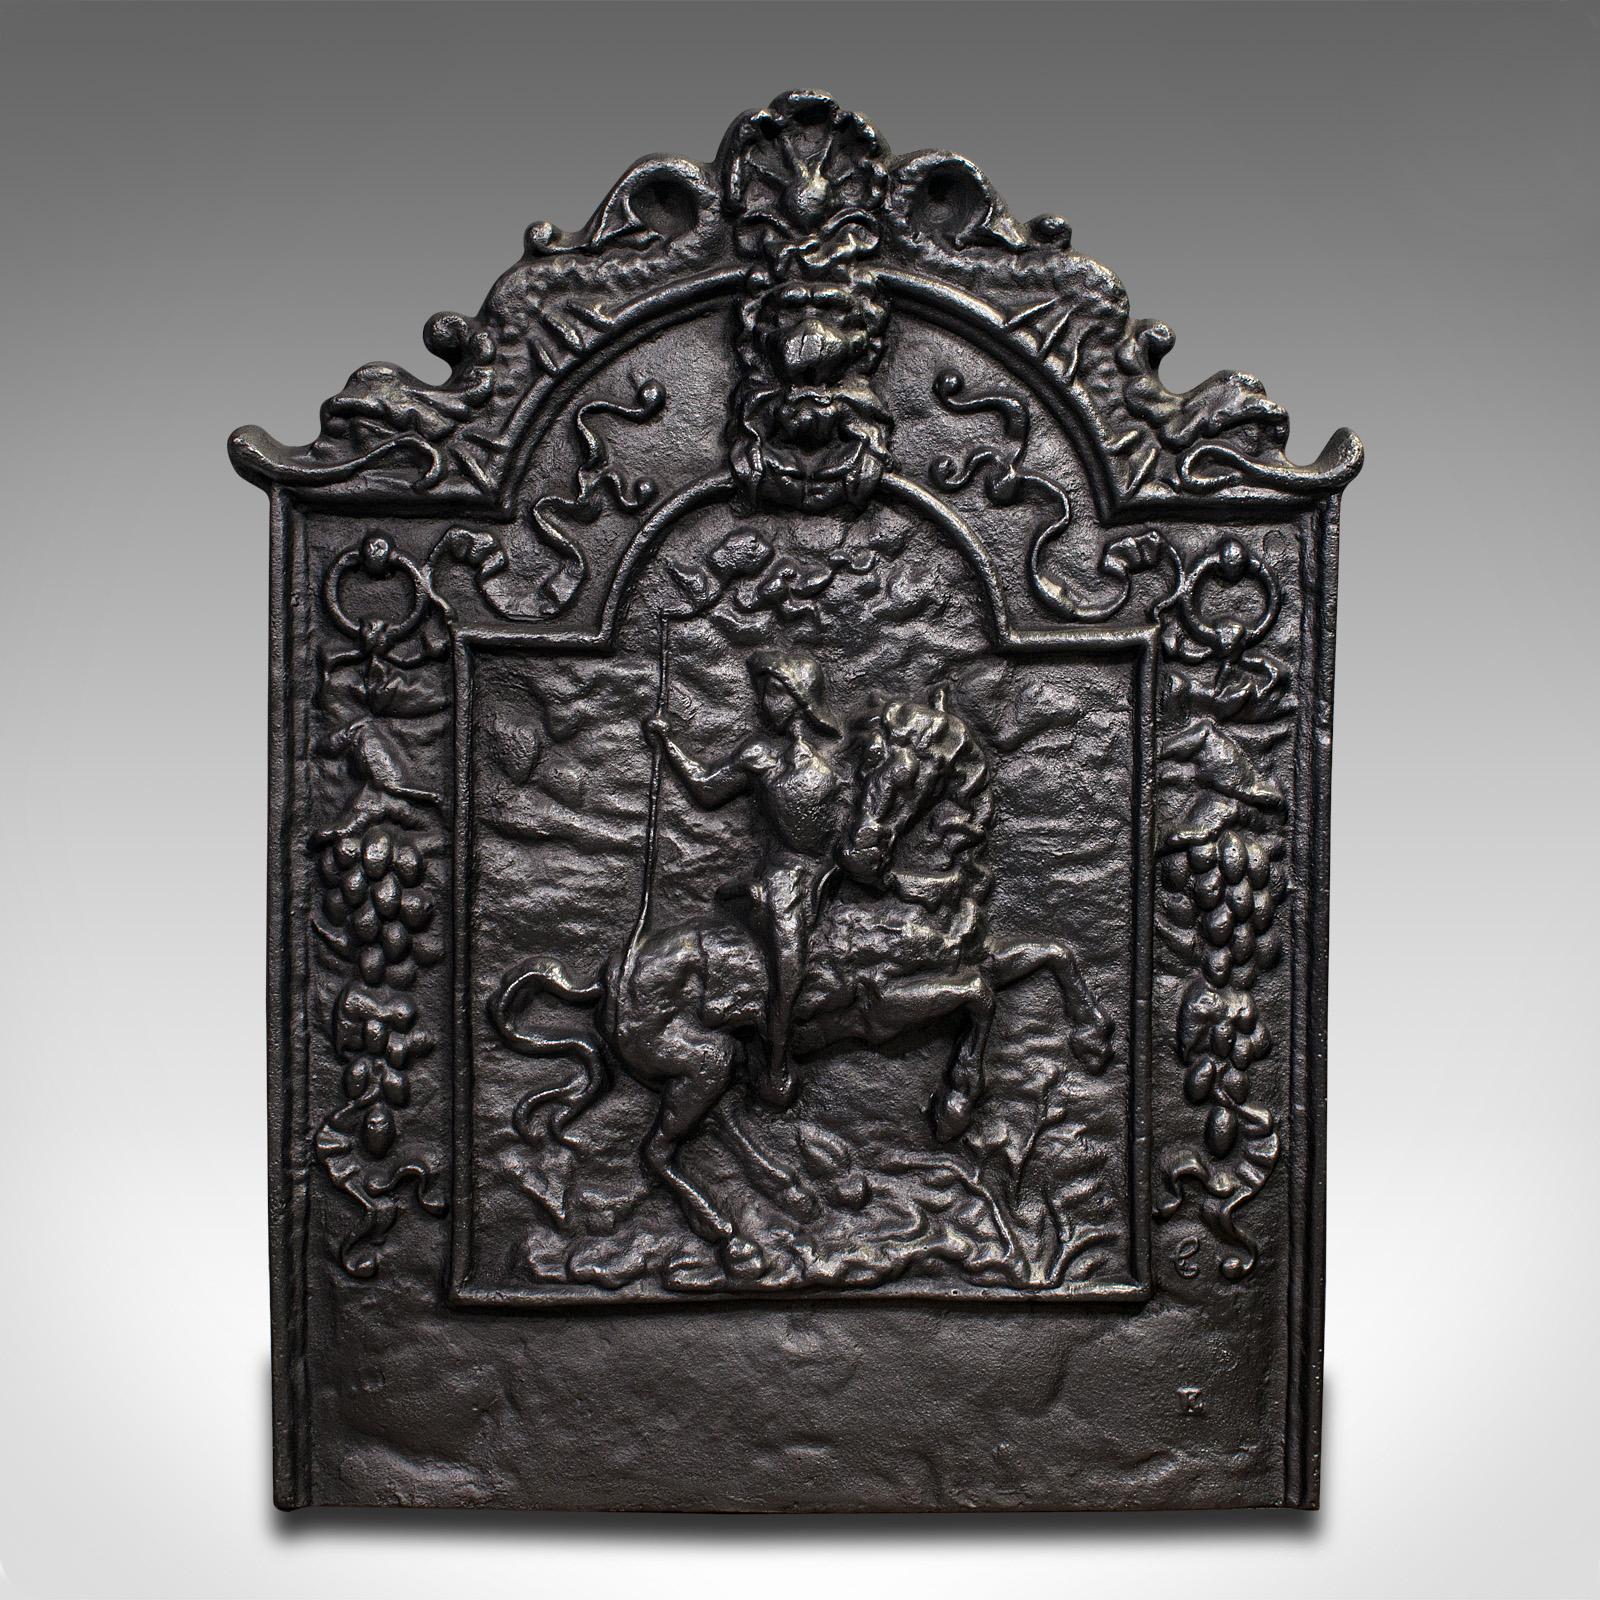 This is an antique decorative fire backrest. An English, cast iron fireplace back, dating to the Victorian period, circa 1900.

Charming cast, depicting a mounted rider and old English icons
Displays a desirable aged patina and in good